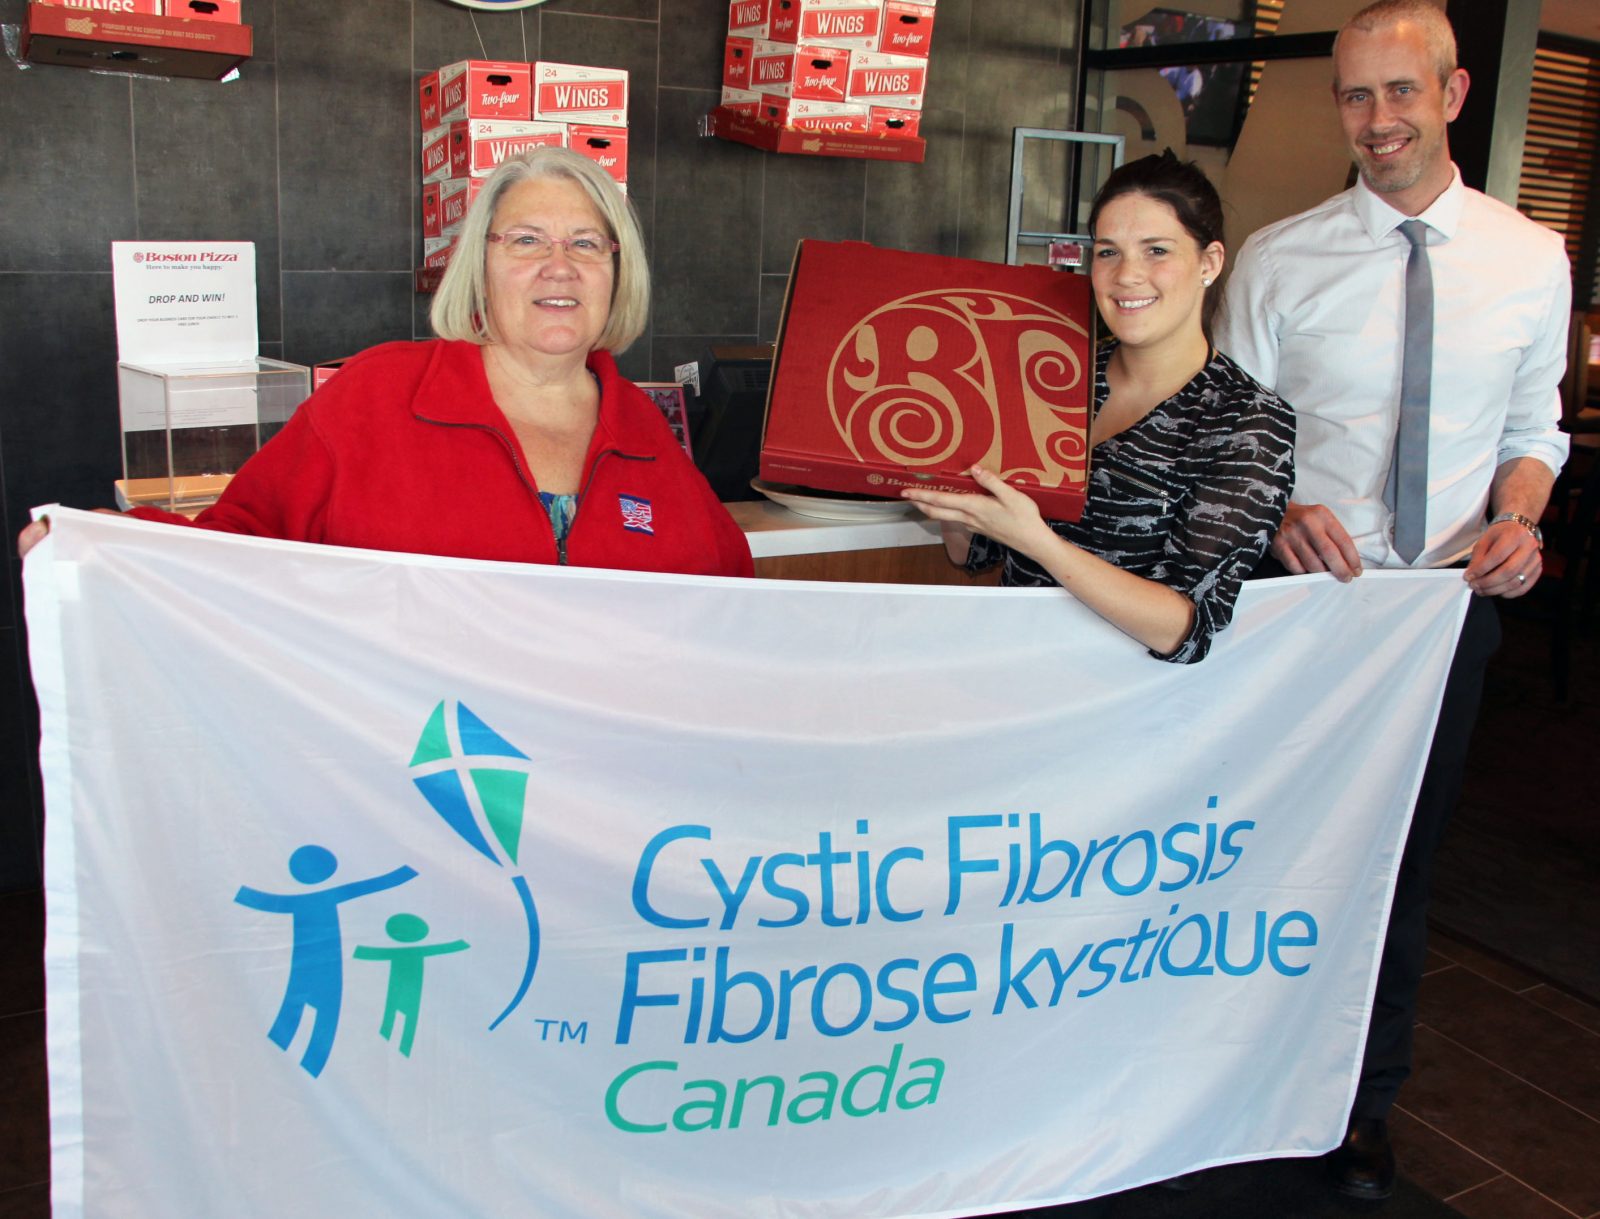 Serving up support for cystic fibrosis